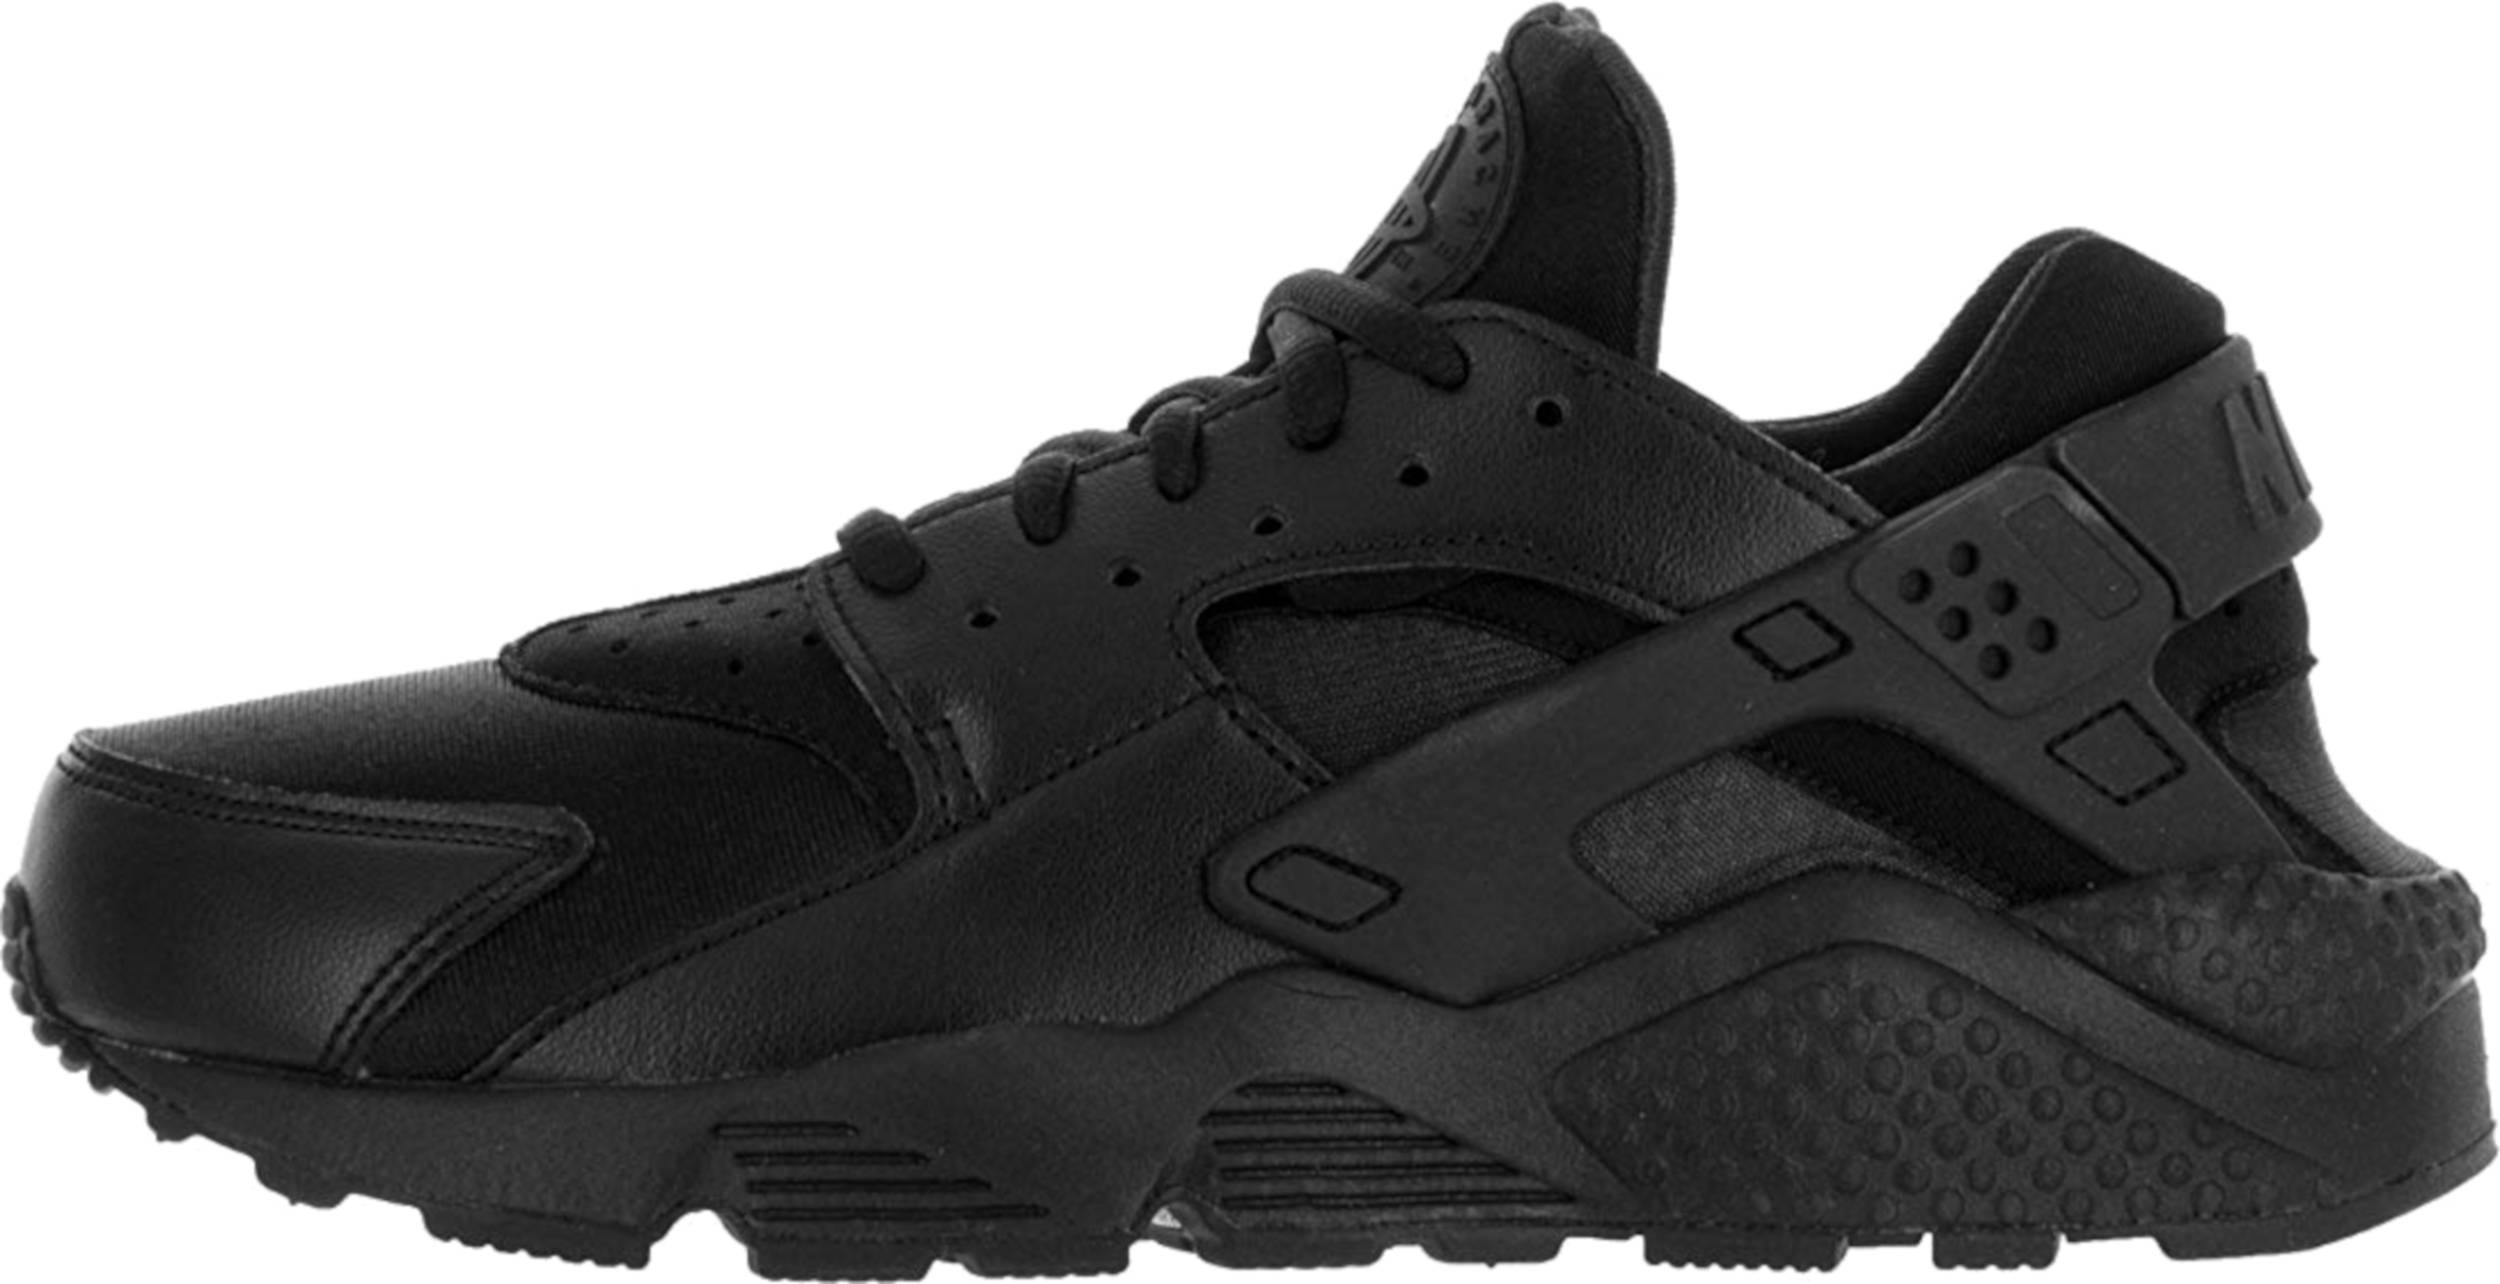 Only $89 + Review of Nike Air Huarache 